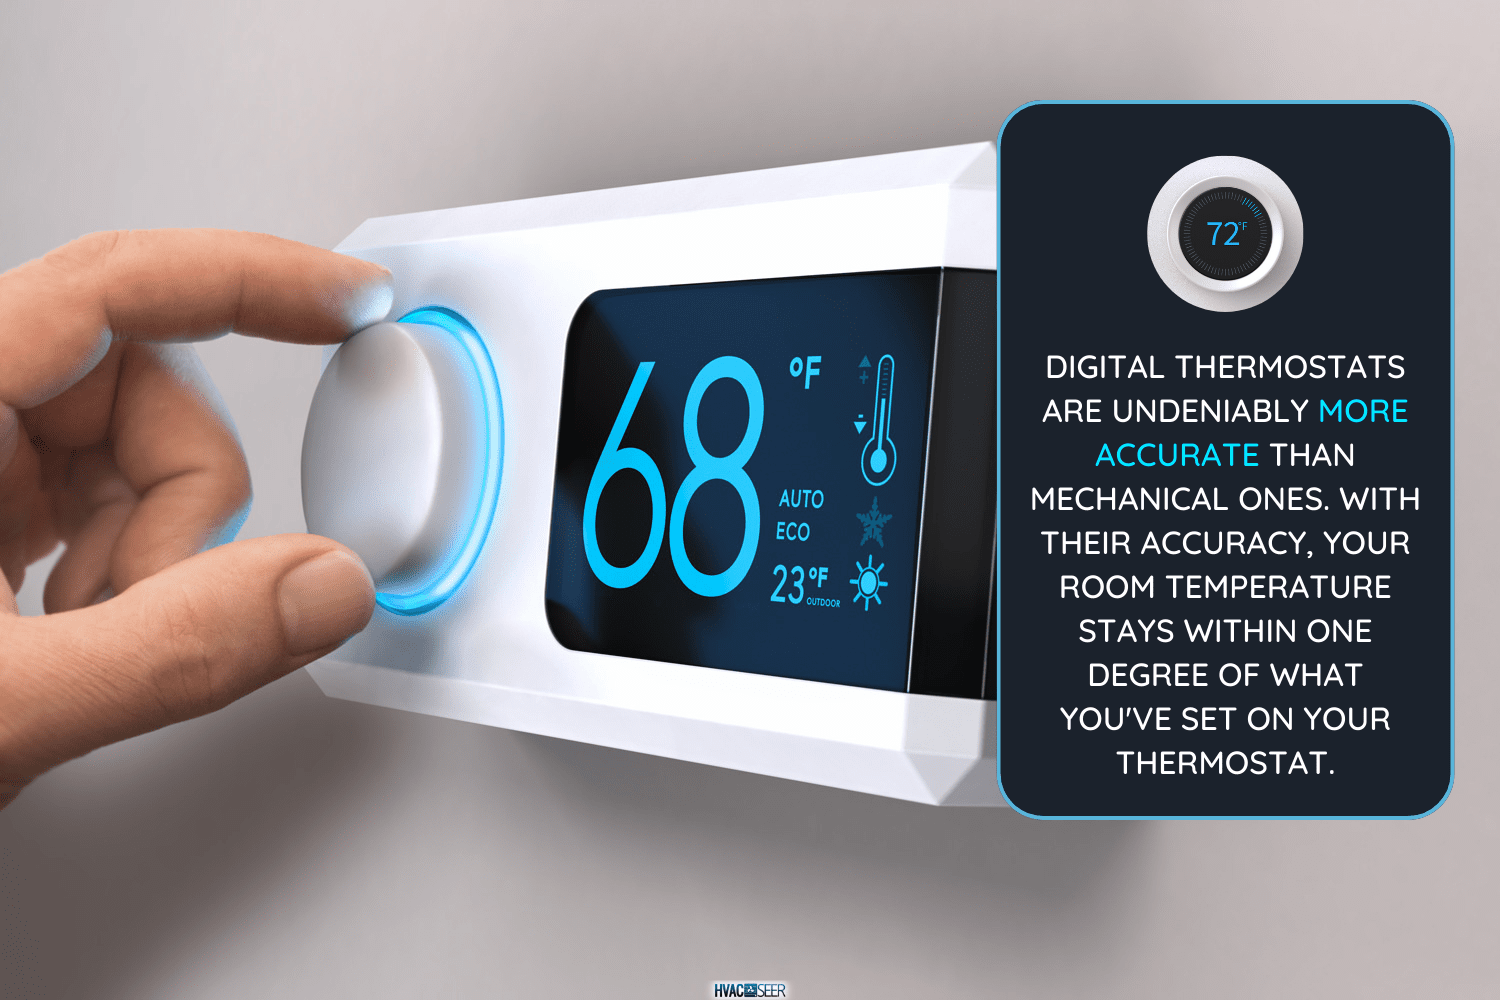 Hand turning a home thermostat knob to set temperature on energy saving mode, Are Digital Thermostats More Accurate?